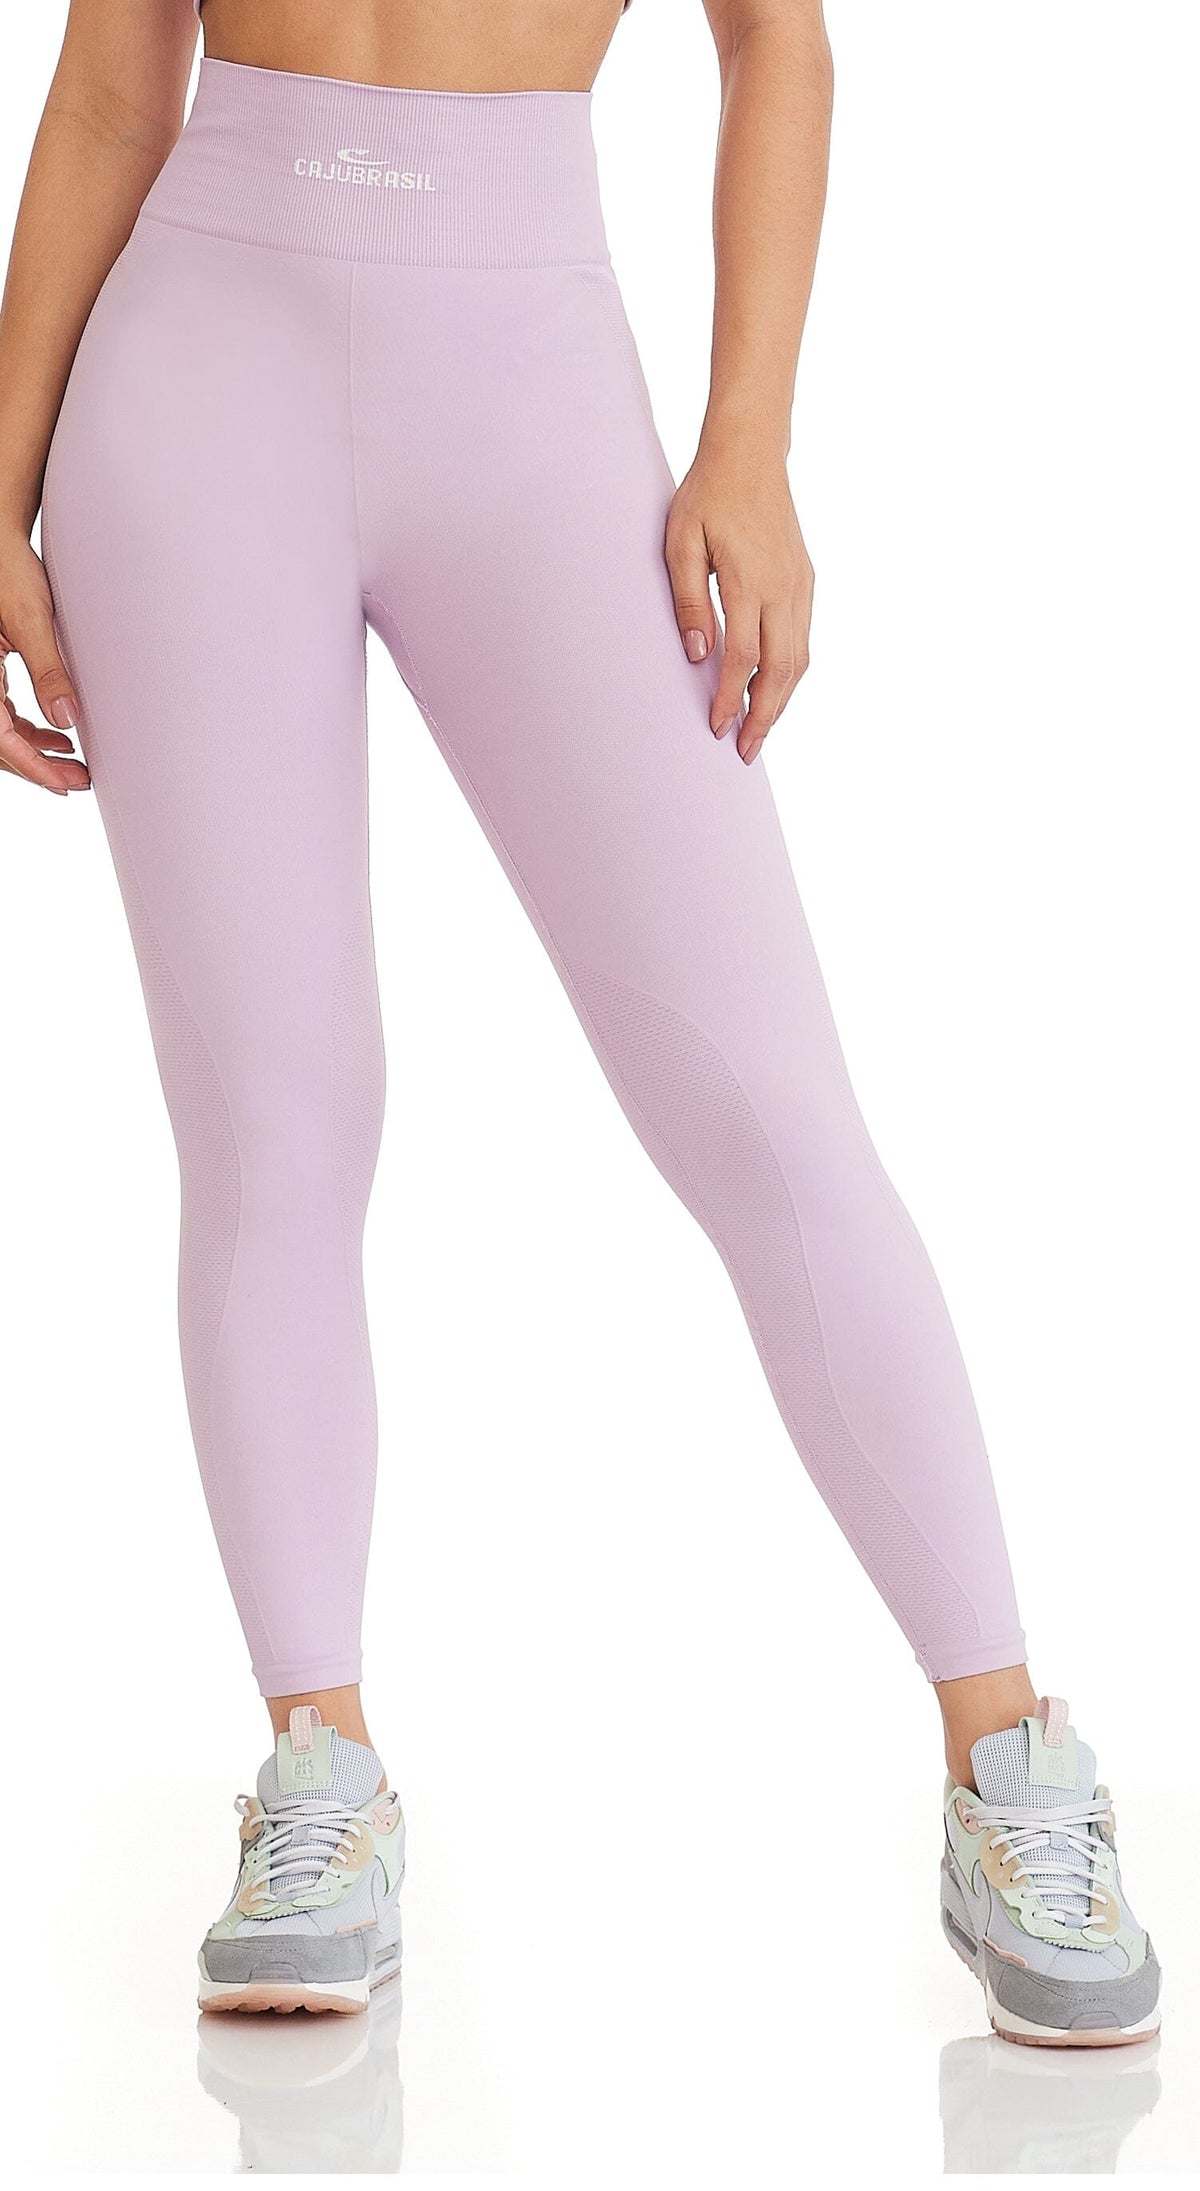 Oxygen Booty Up Seamless Legging - Lilac